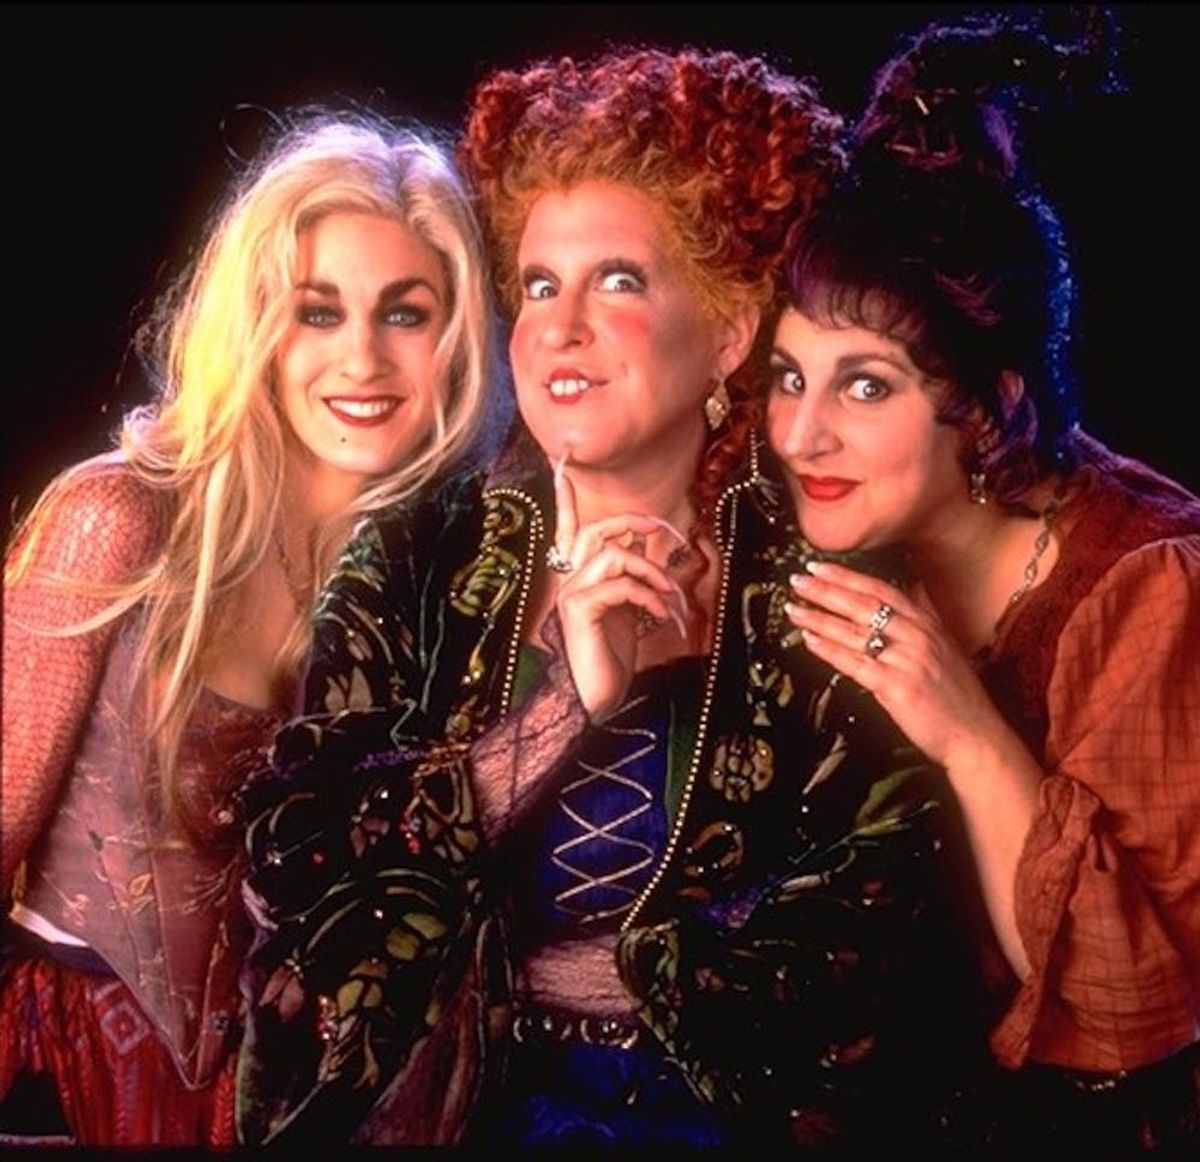 Freeform Kicks Off ’31 Nights of Halloween’ With a ‘Hocus Pocus’-Inspired Music Video